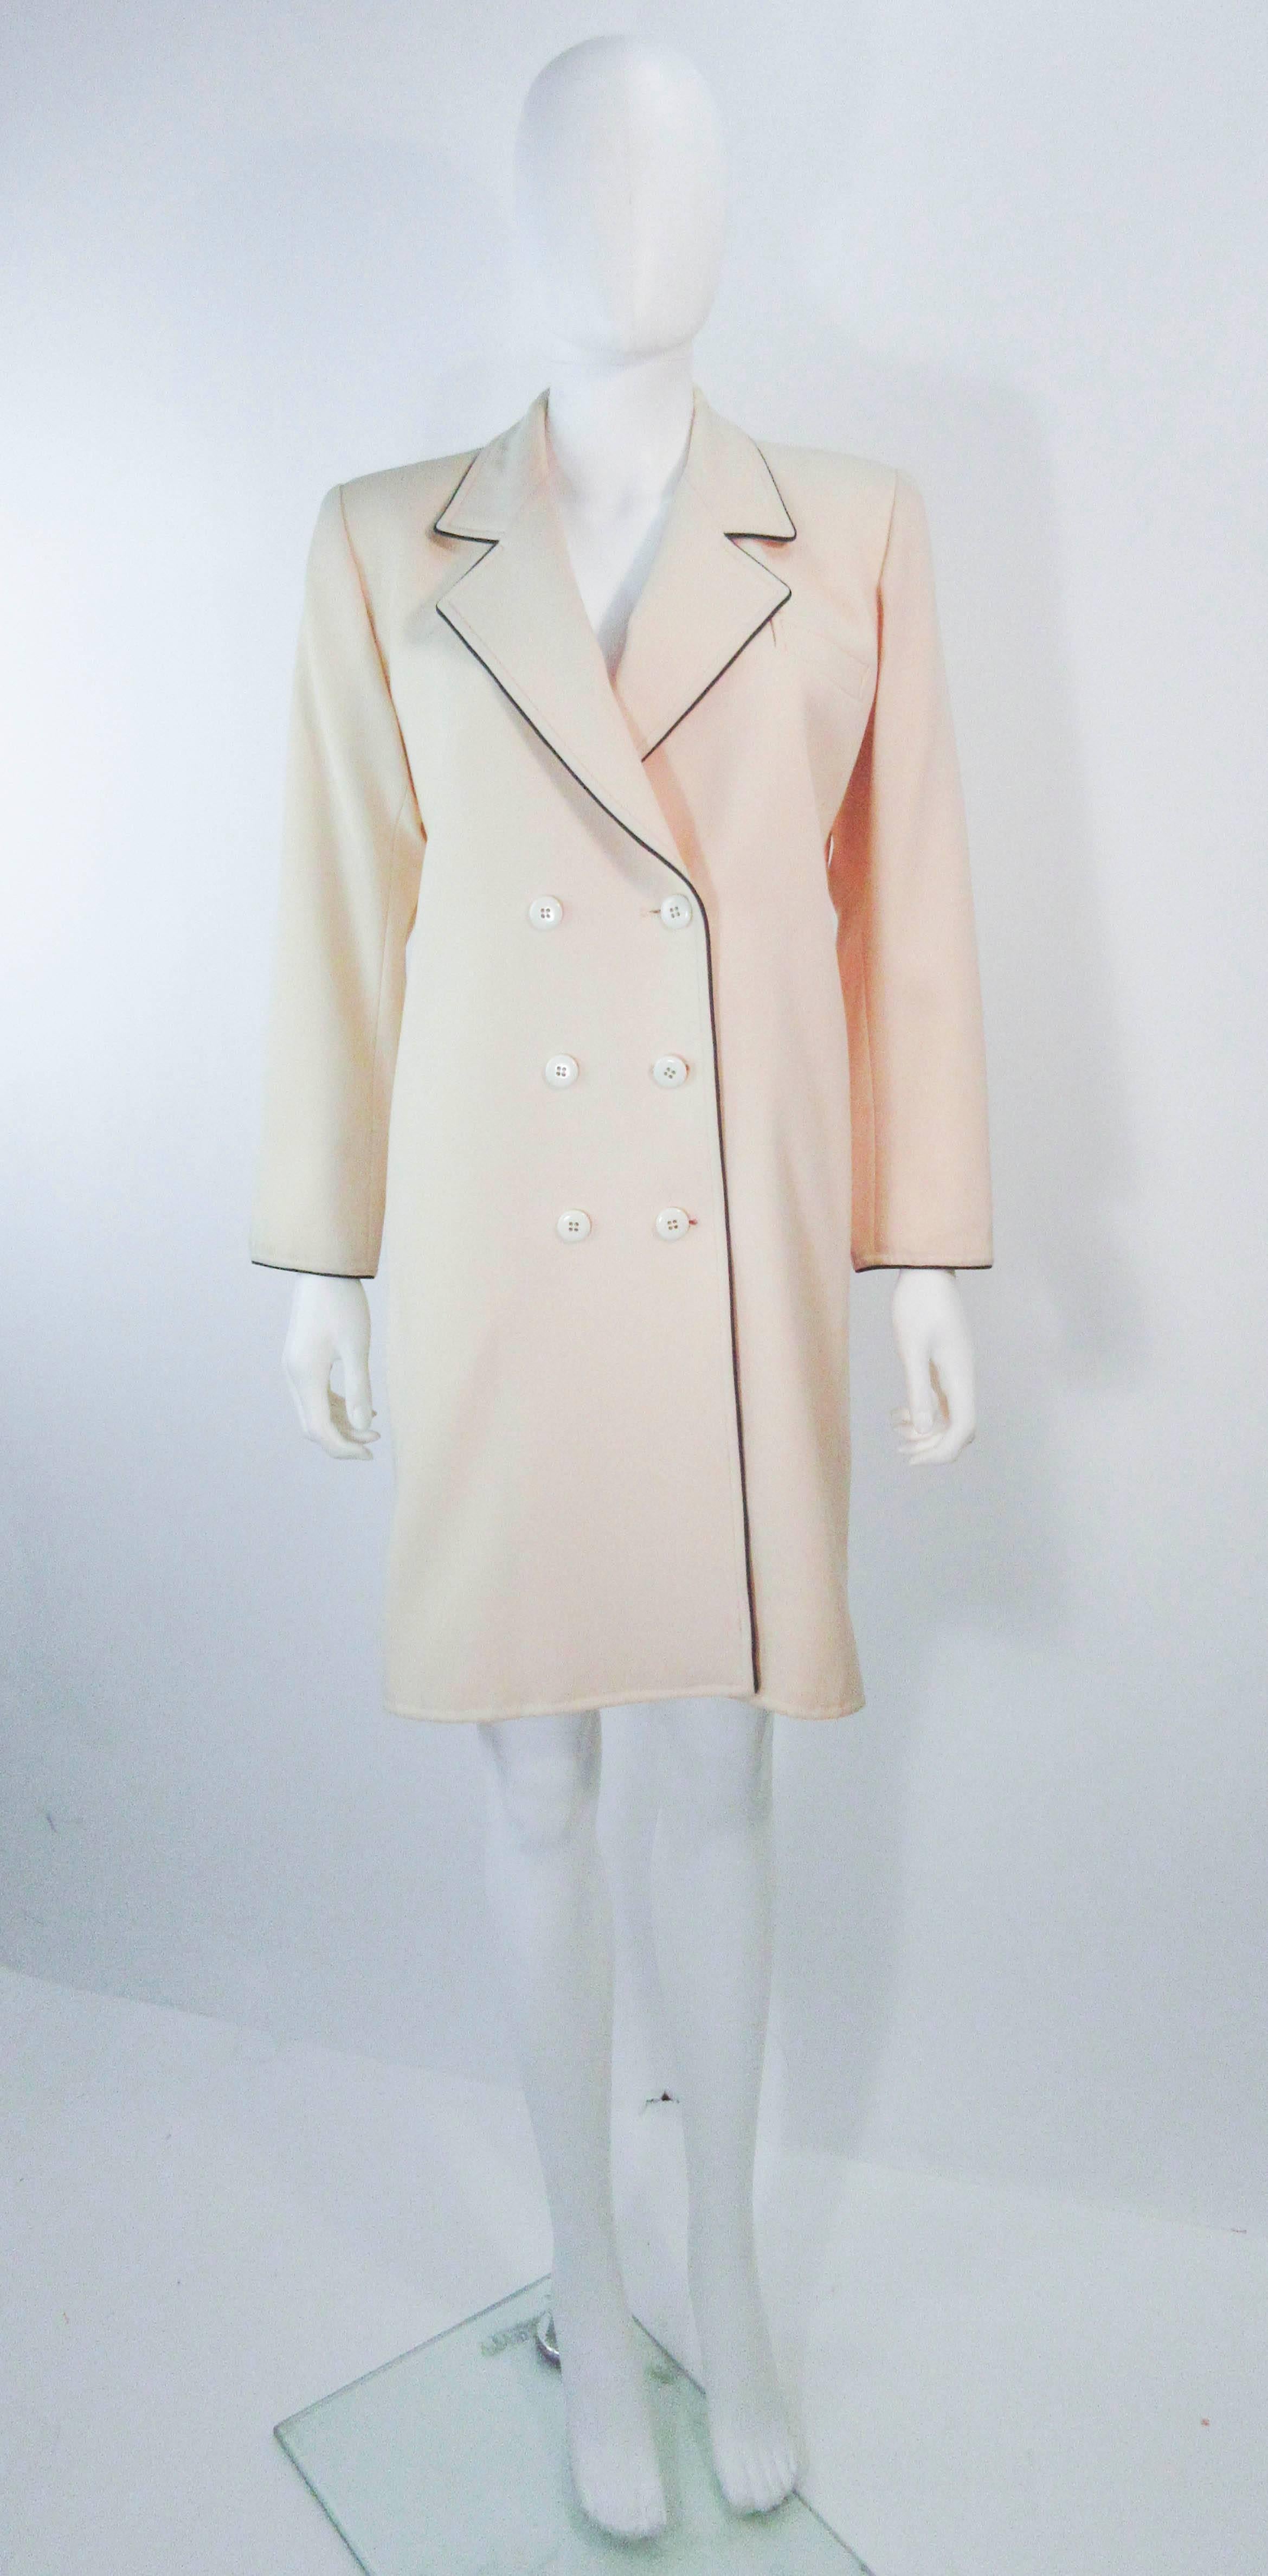 This Yves Saint Laurent coat/dress is composed of a cream wool with black pipping trim. There are center front button closure. In great vintage condition there is some signs of wear due to age, the size and fabric content label are missing (have